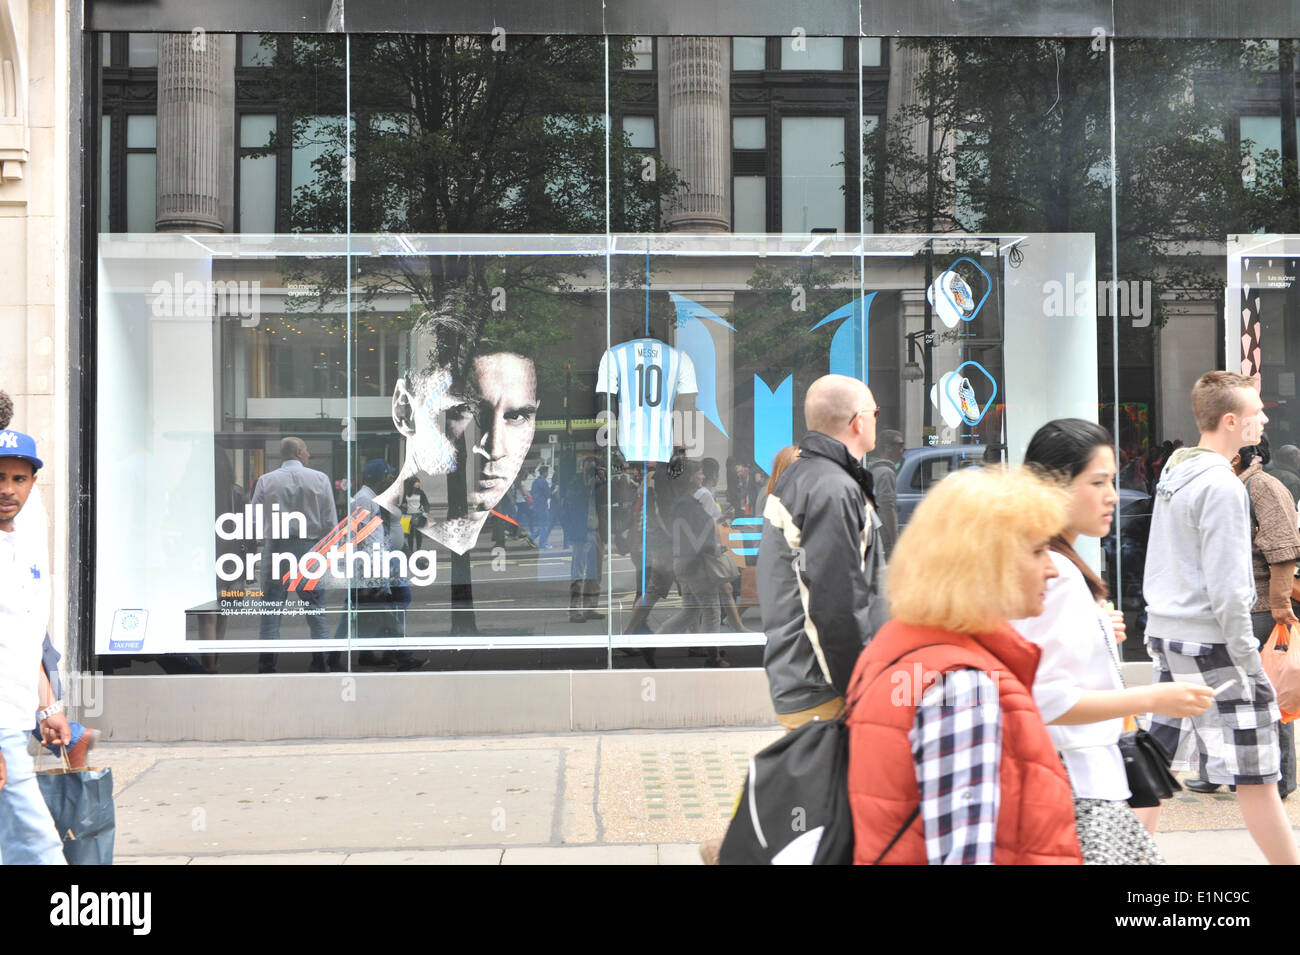 Oxford Street, London, UK. June 2014. Adidas store with World Cup adverts ahead of the World Cup in Brazil. Credit: Matthew Chattle/Alamy Live News Stock Photo - Alamy